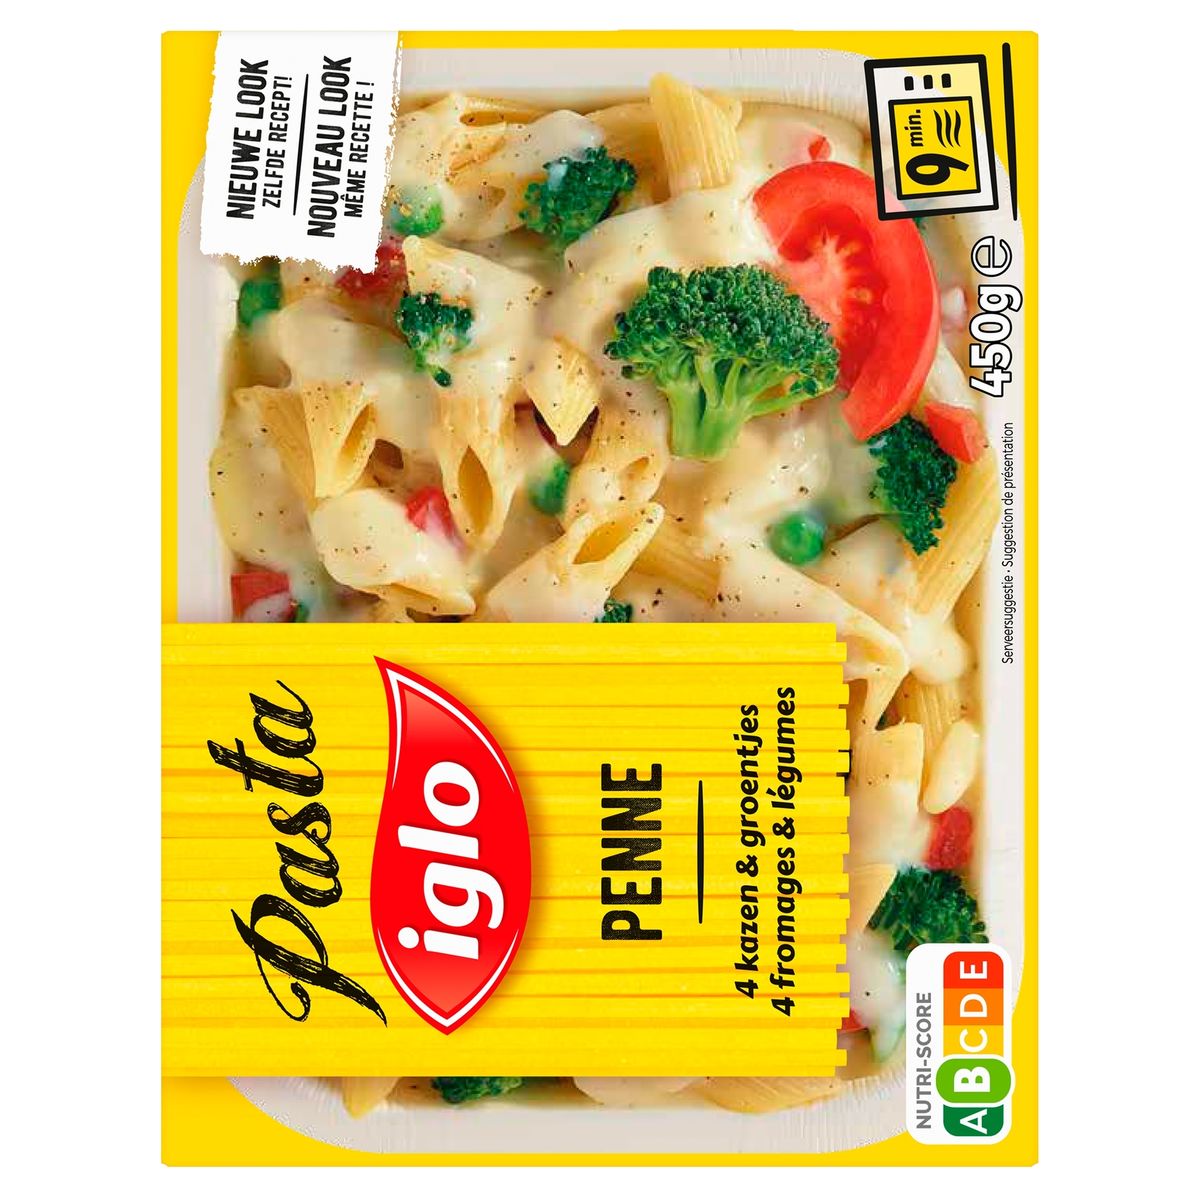 Iglo Pasta Penne 4 Fromages & Légumes 450 g